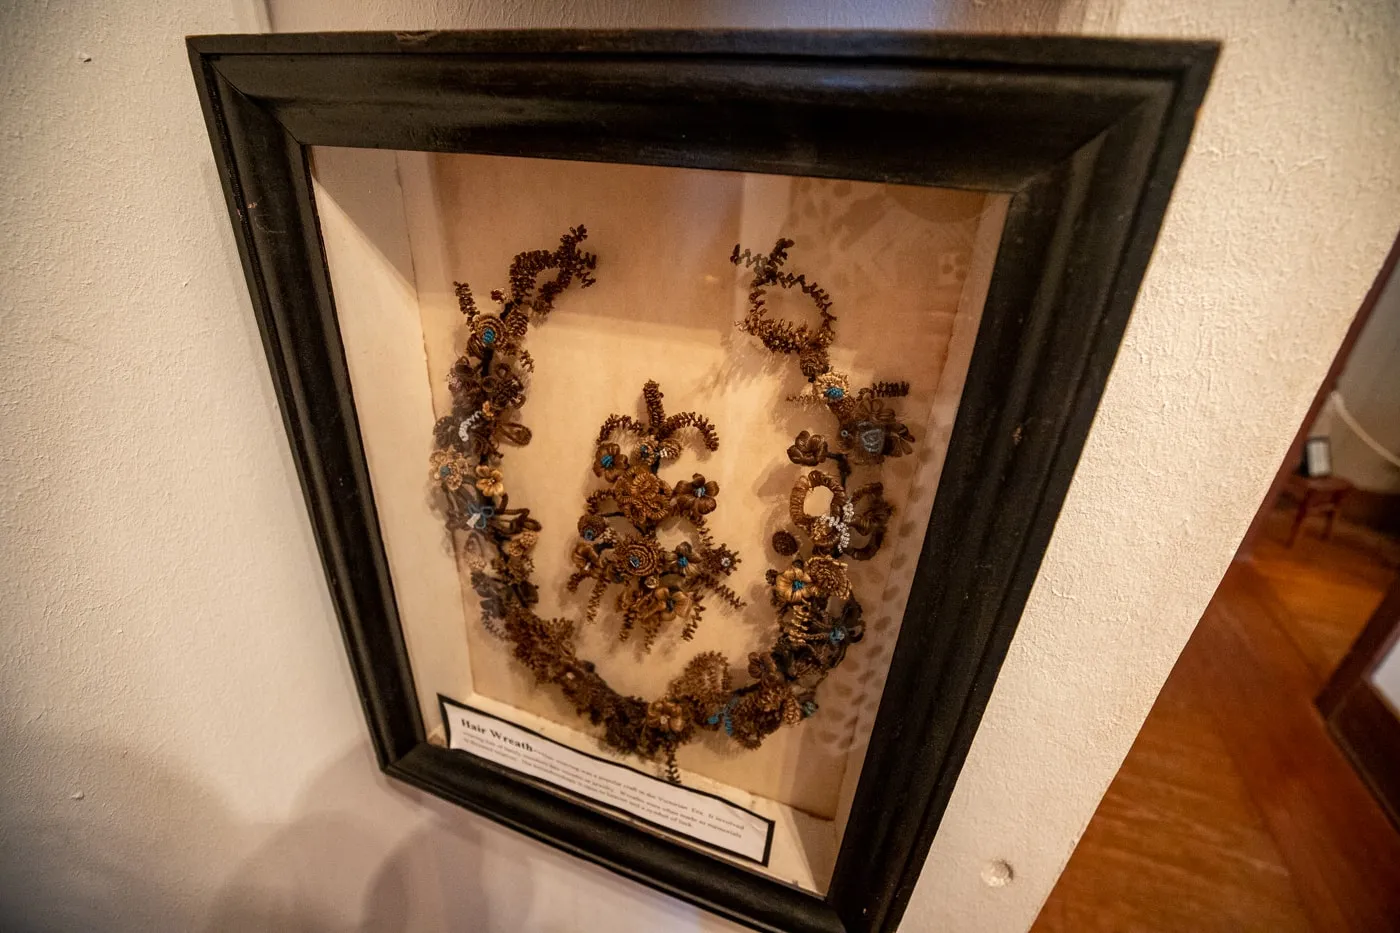 Artwork made from hair - Old Town Museum at the National Route 66 Museum in Elk City, Oklahoma